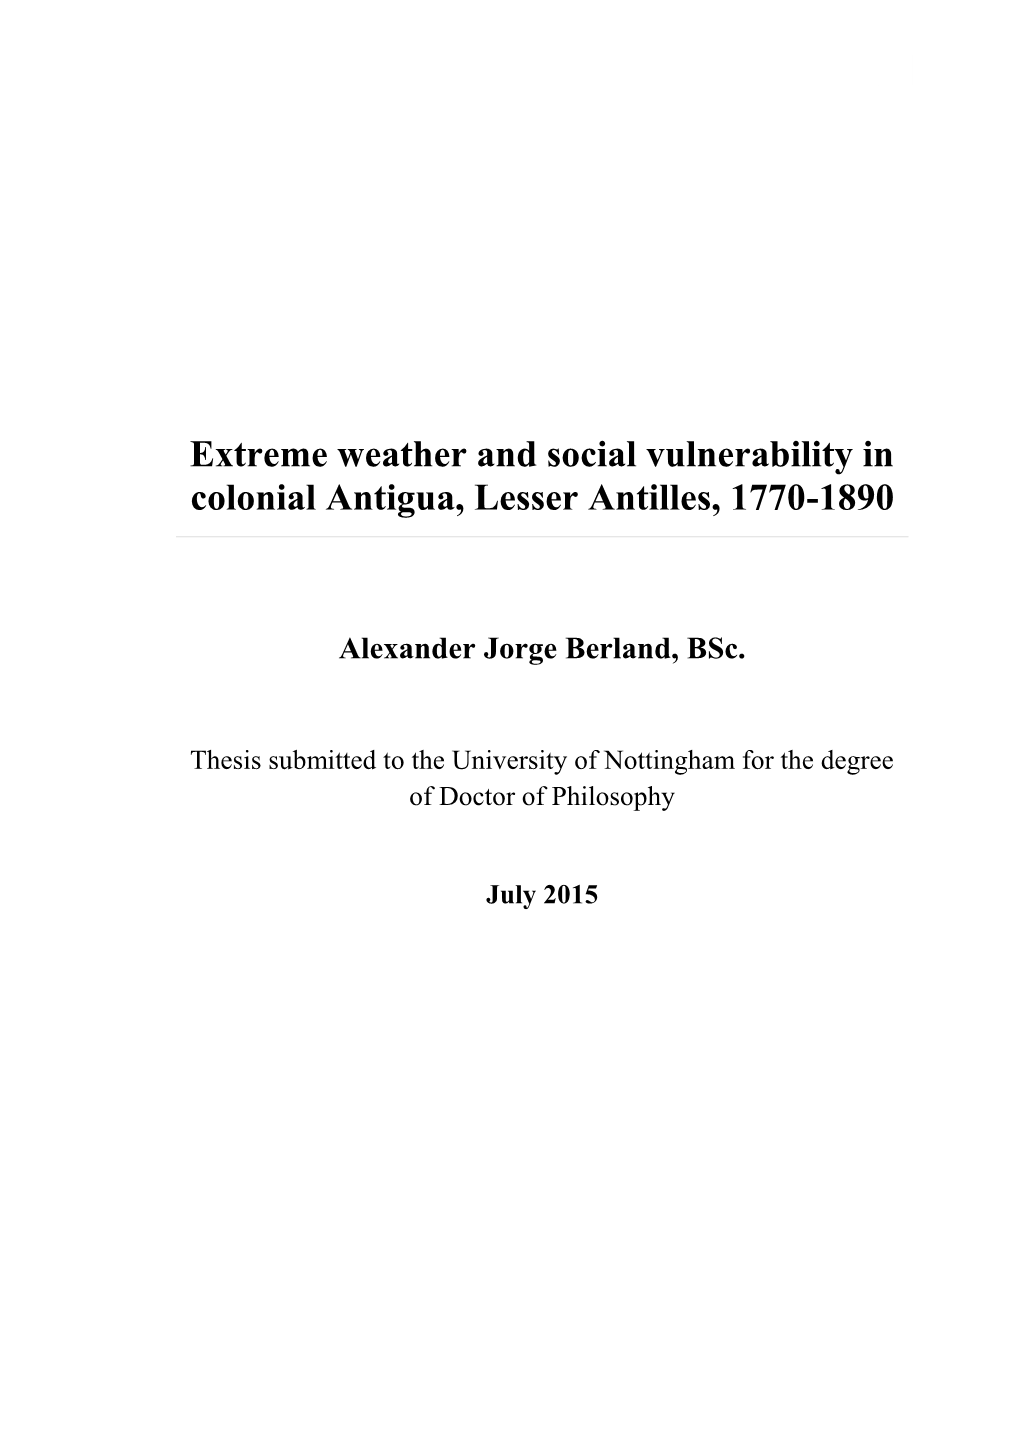 Extreme Weather and Social Vulnerability in Colonial Antigua, Lesser Antilles, 1770-1890